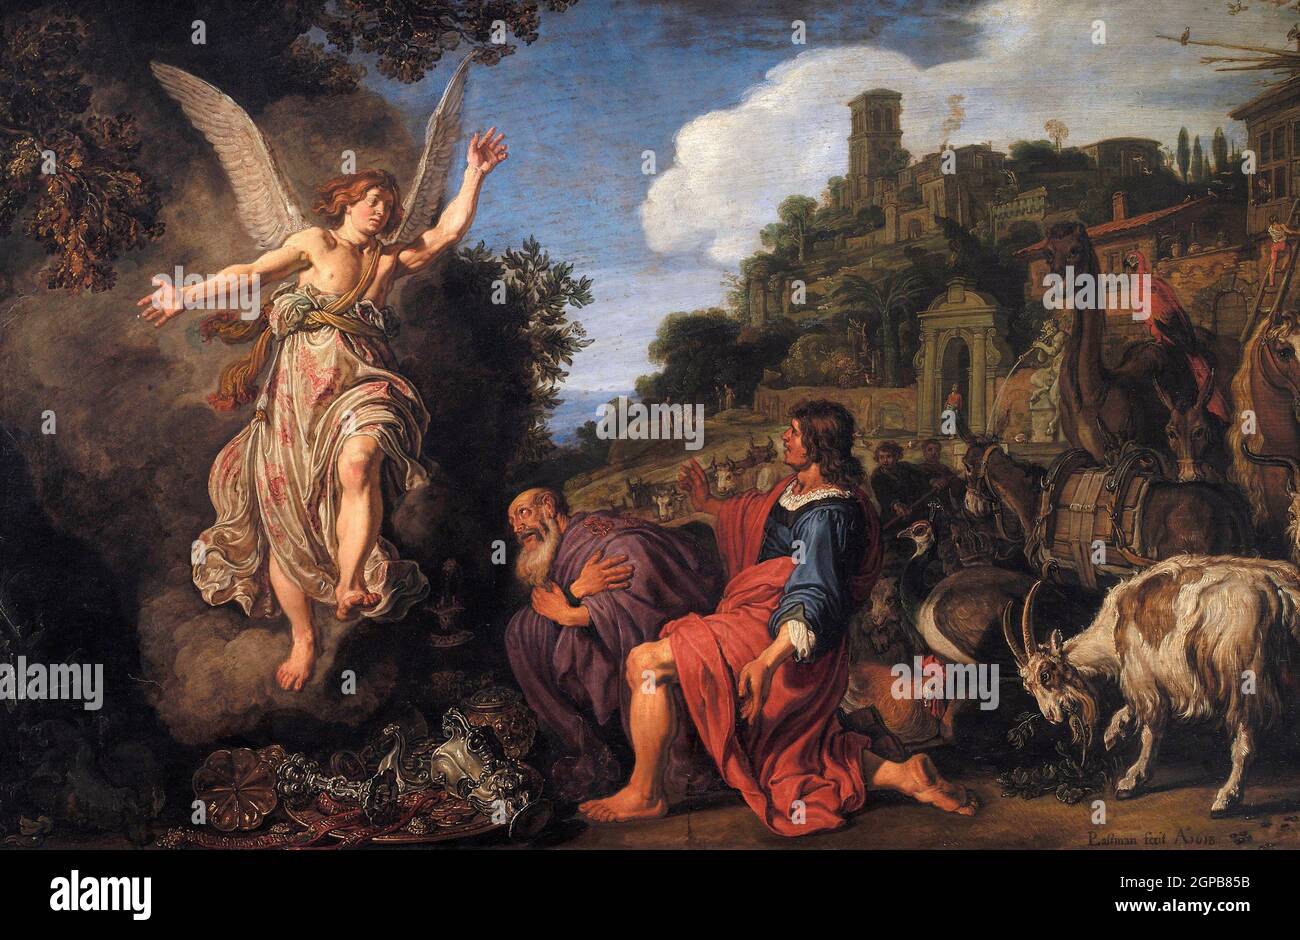 The Angel Raphael Takes Leave of Old Tobit and his Son Tobias  - Pieter Lastman, 1618 Stock Photo